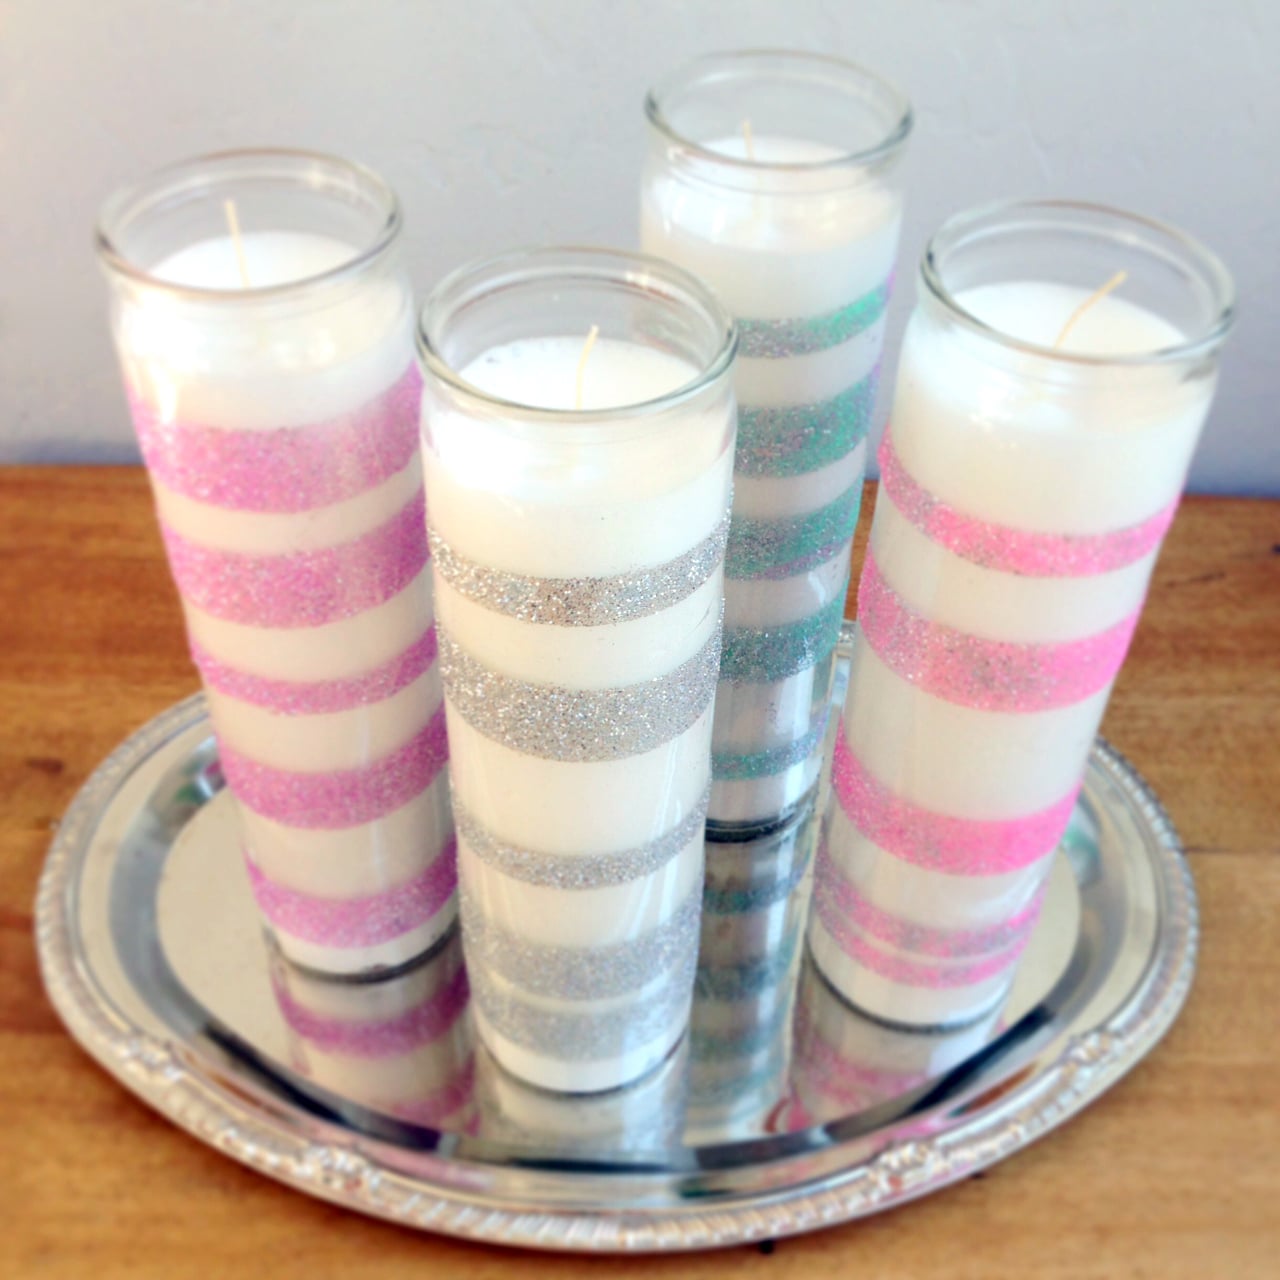 Twine Wrapped Glitter Soy Candle-Making for Gifts or Holidays, Callie Mac  Design